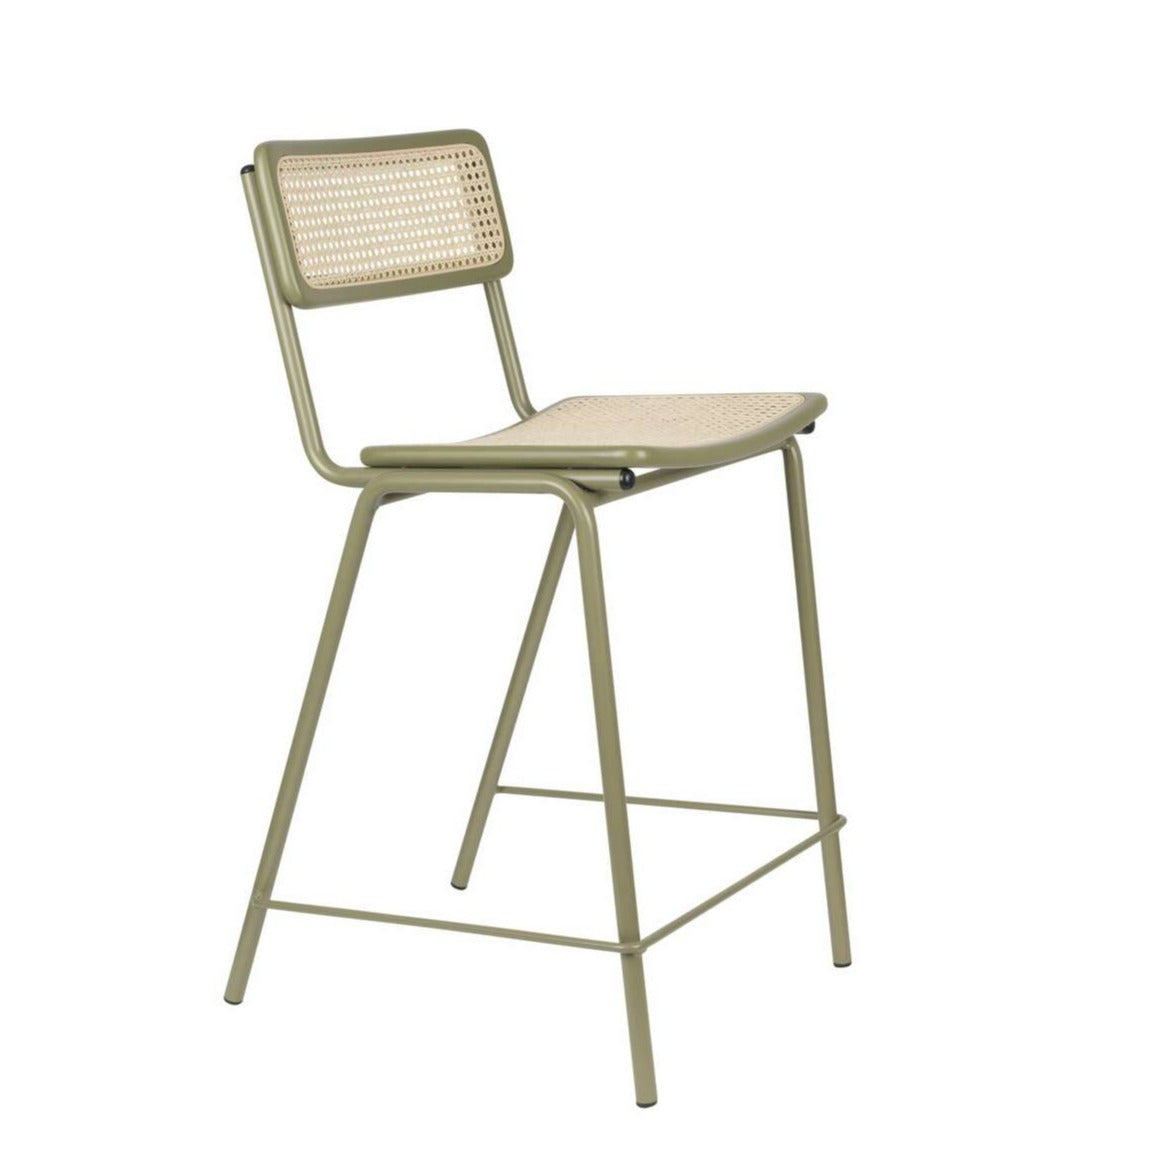 The combination of the appearance of the 21st century and the Bauhaus period is the definition of the JORT bar stool. The braided seat and backrest from rattan was locked in a steel frame, along with its wooden elements. Thanks to the use of such materials, each room in the boho atmosphere, and in particular the kitchen will gain even greater coziness. Each island will become a place to relax and drink afternoon coffee.